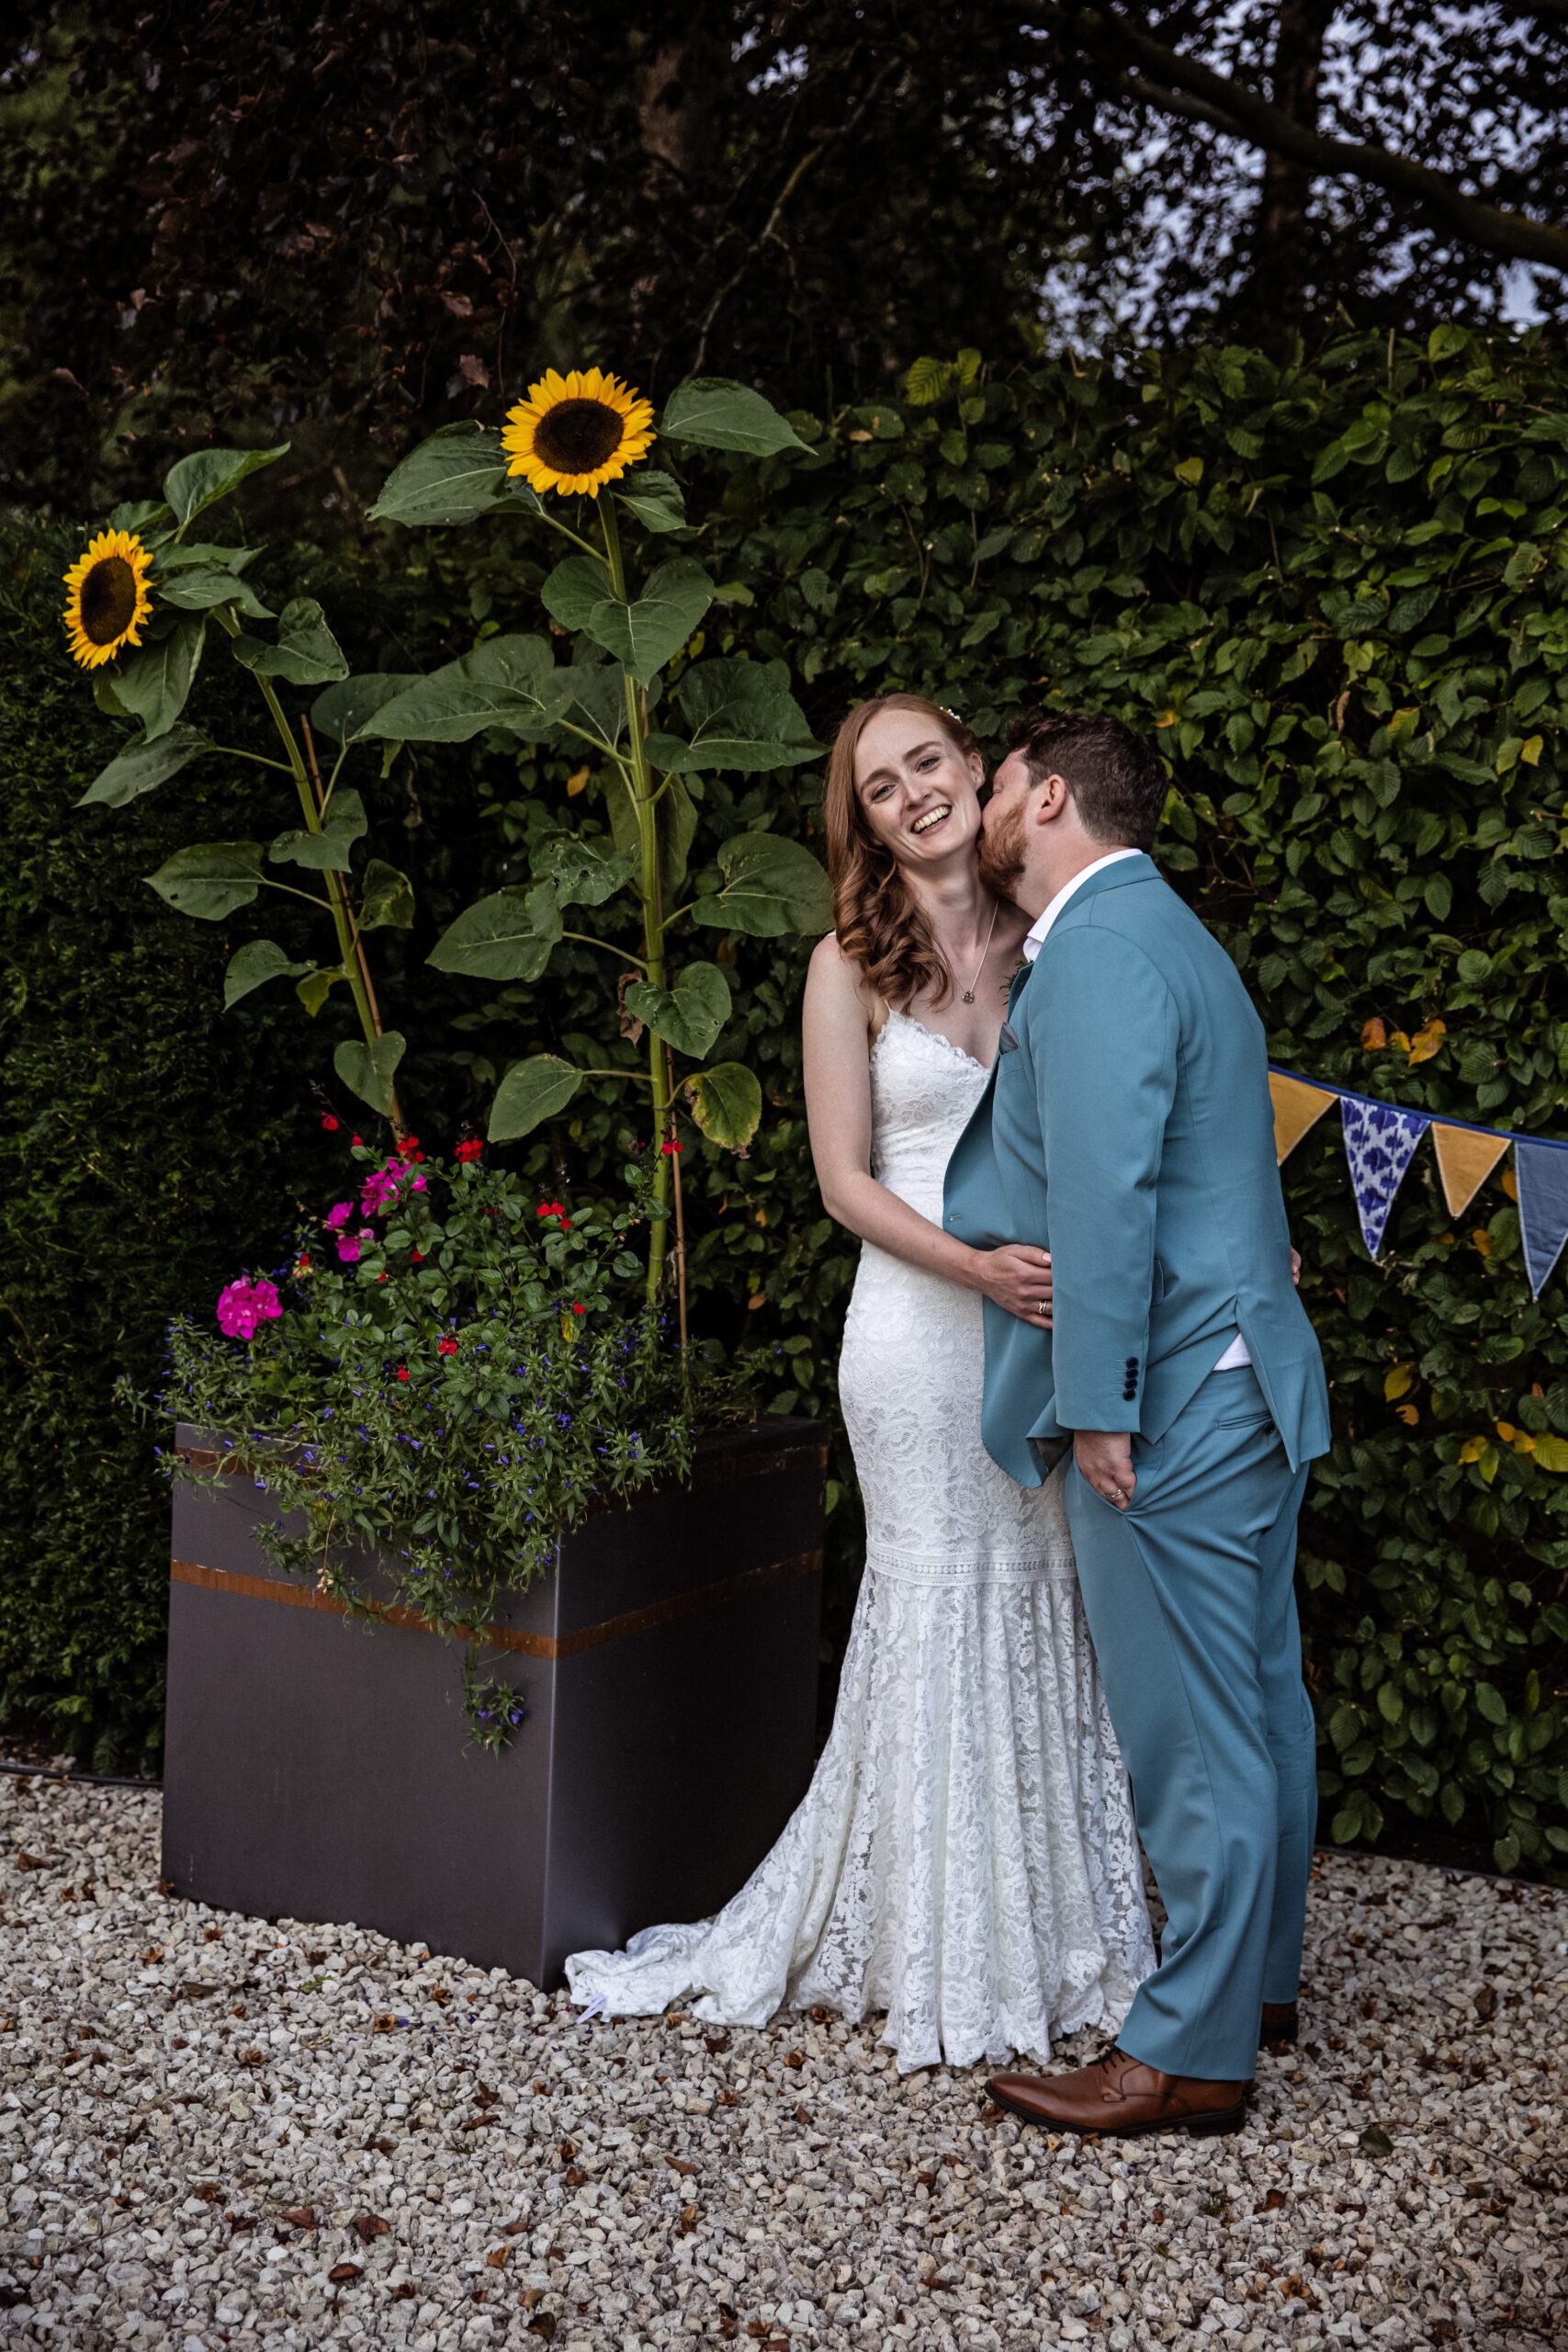 the bride and groom pose for picture in their garden with flowers in foreground